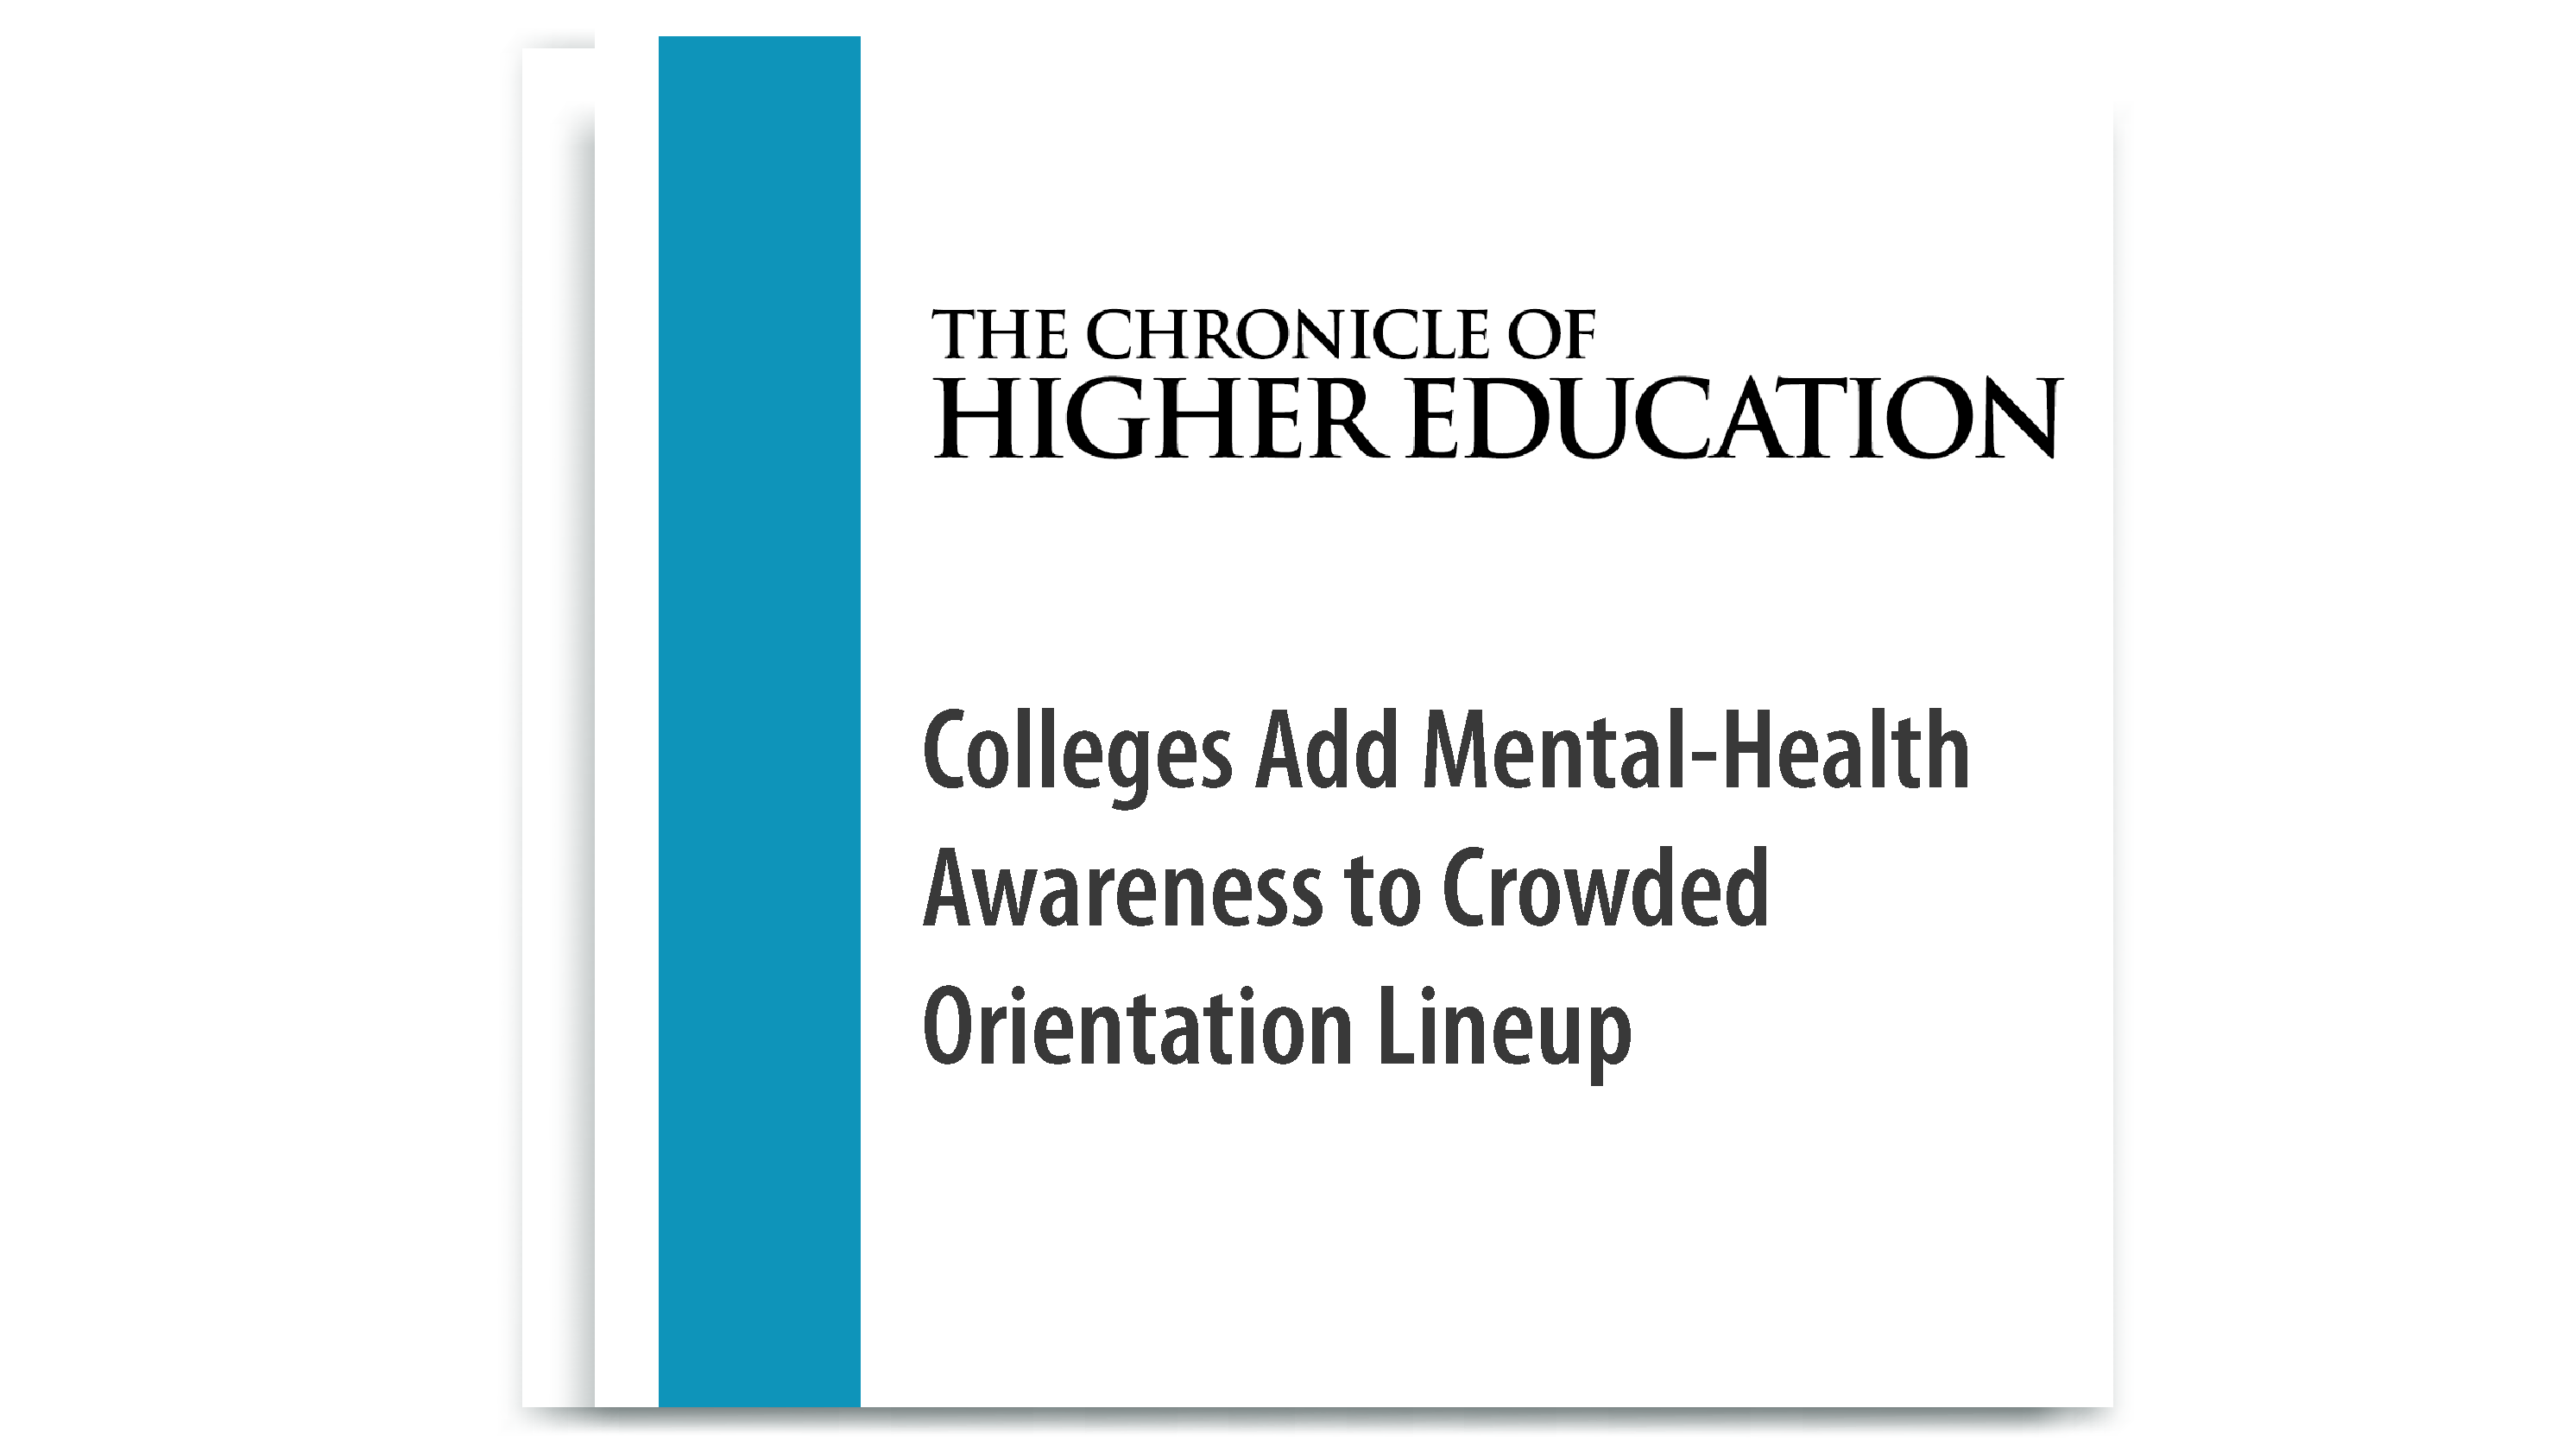 Colleges Add Mental-Health Awareness to Crowded Orientation Lineup